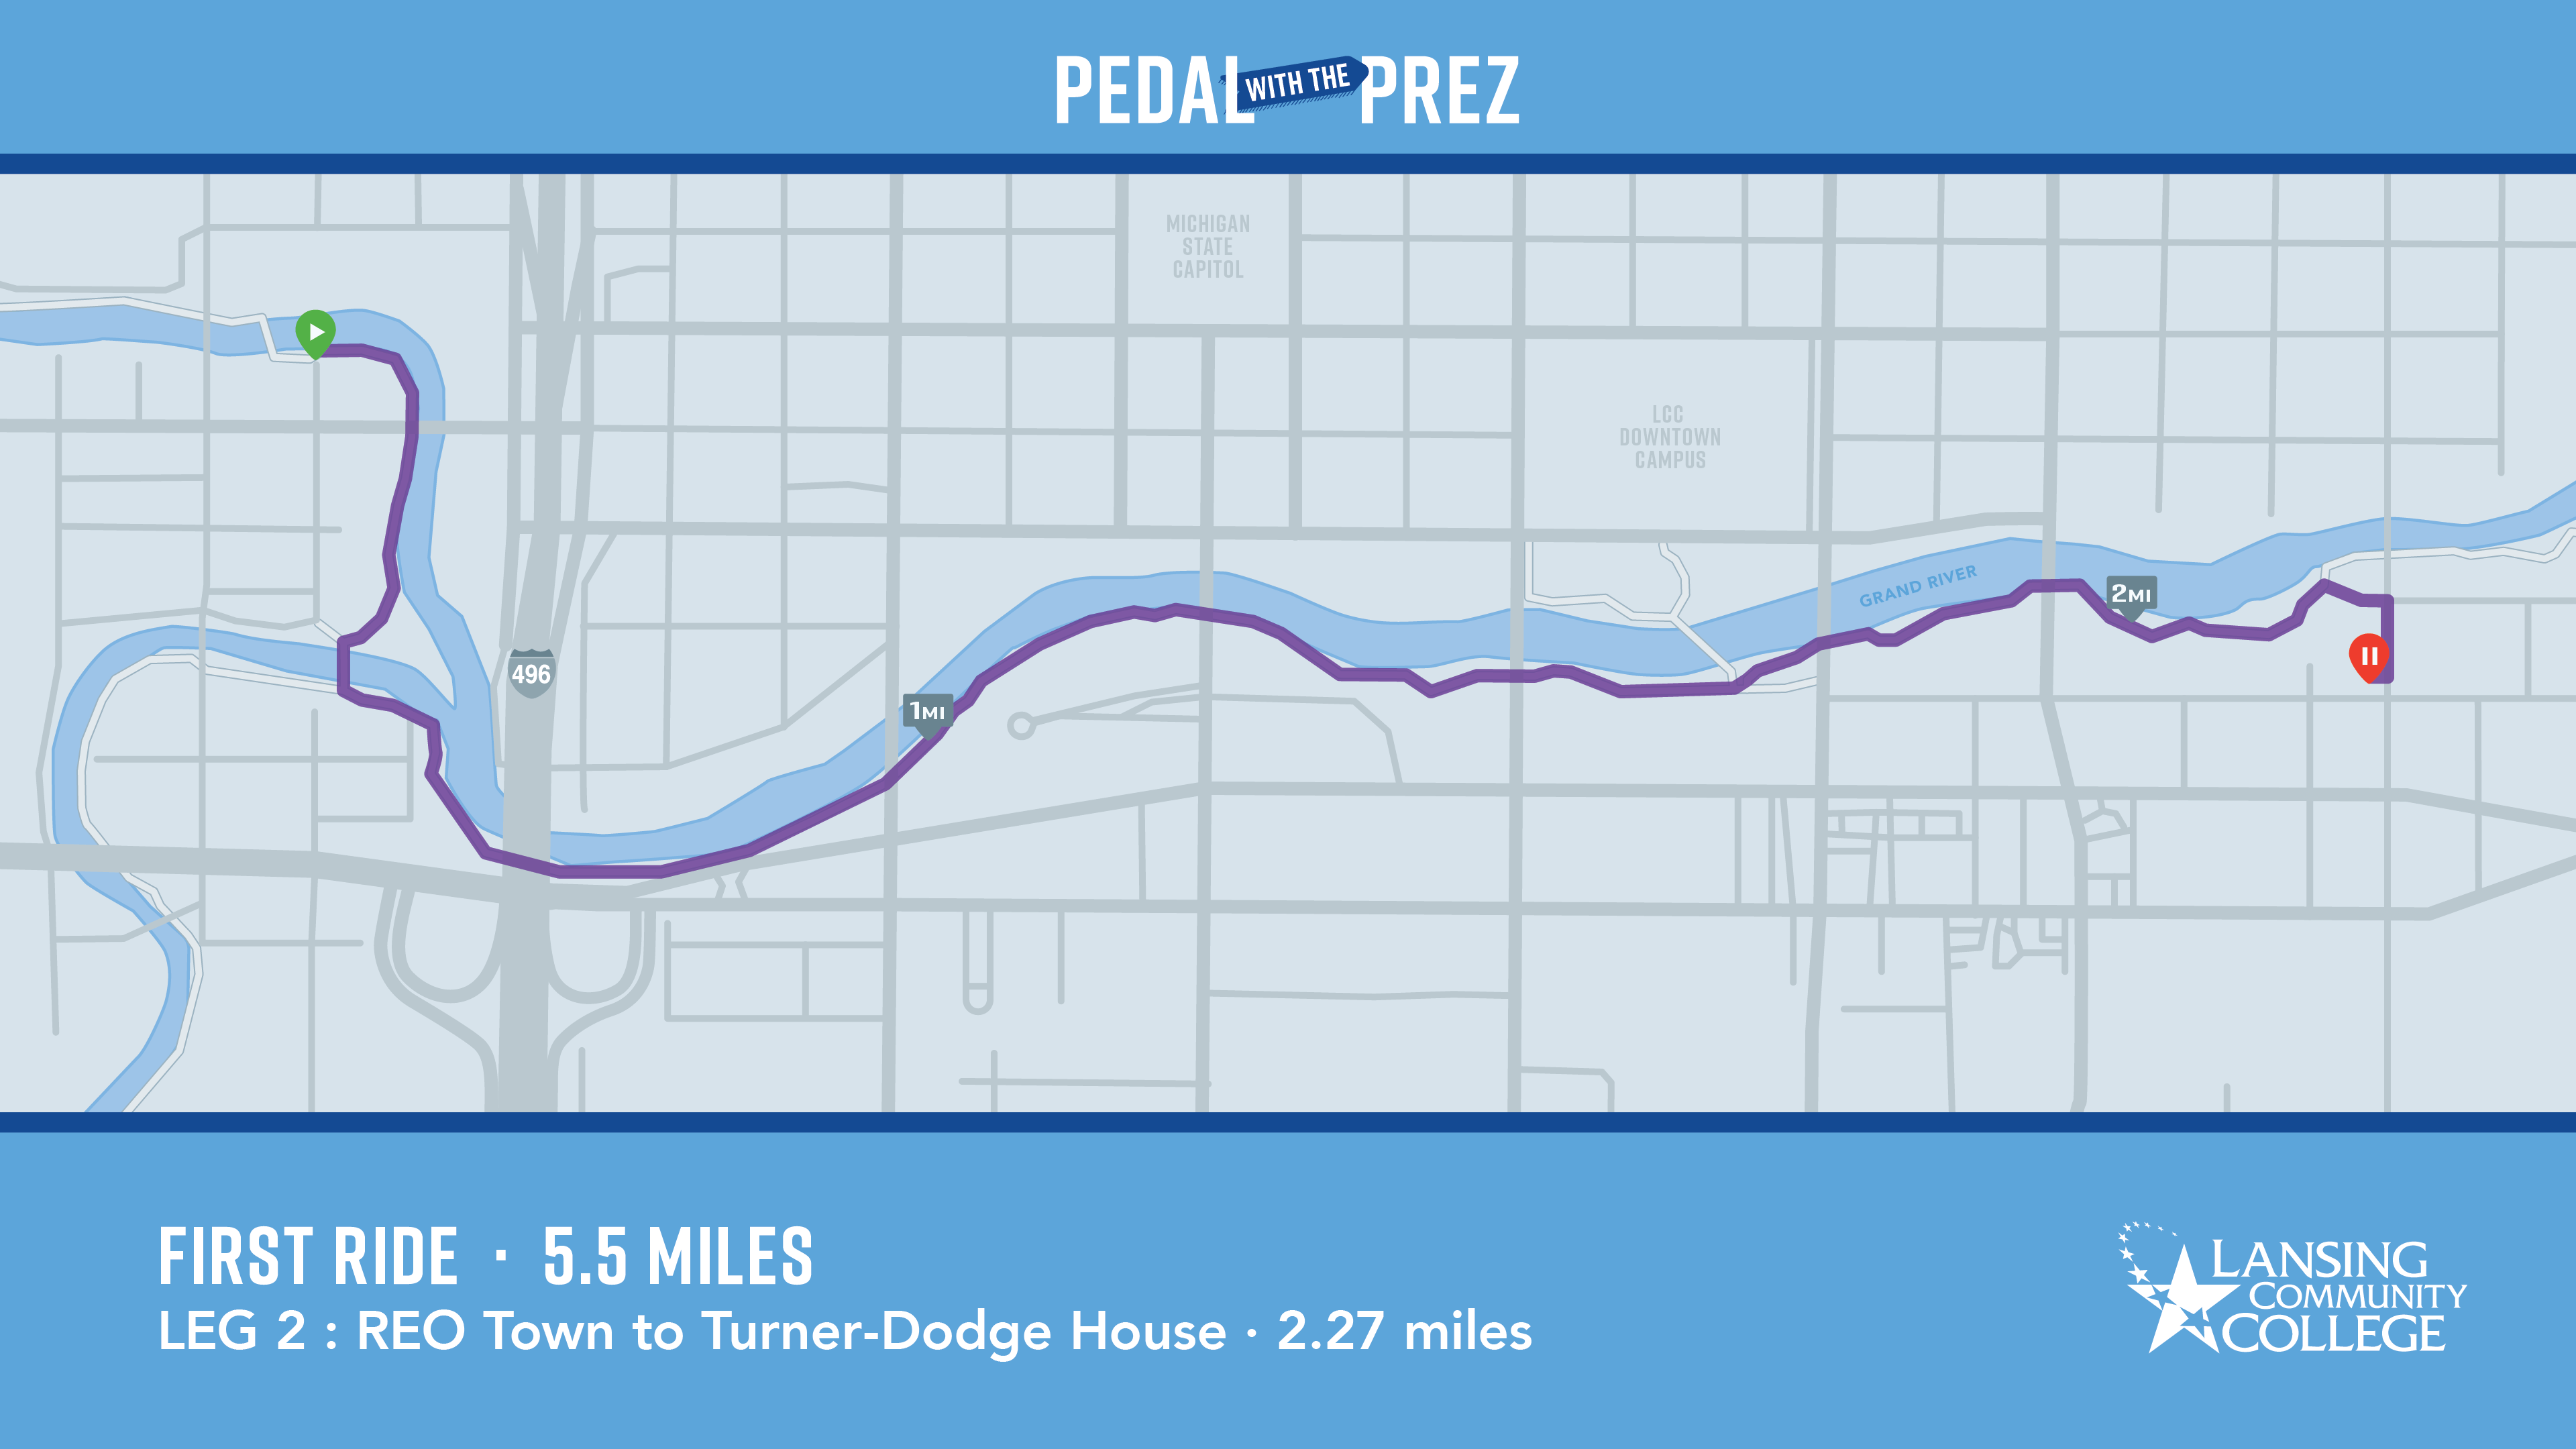 Leg 2: REO Town to Turner Dodge House